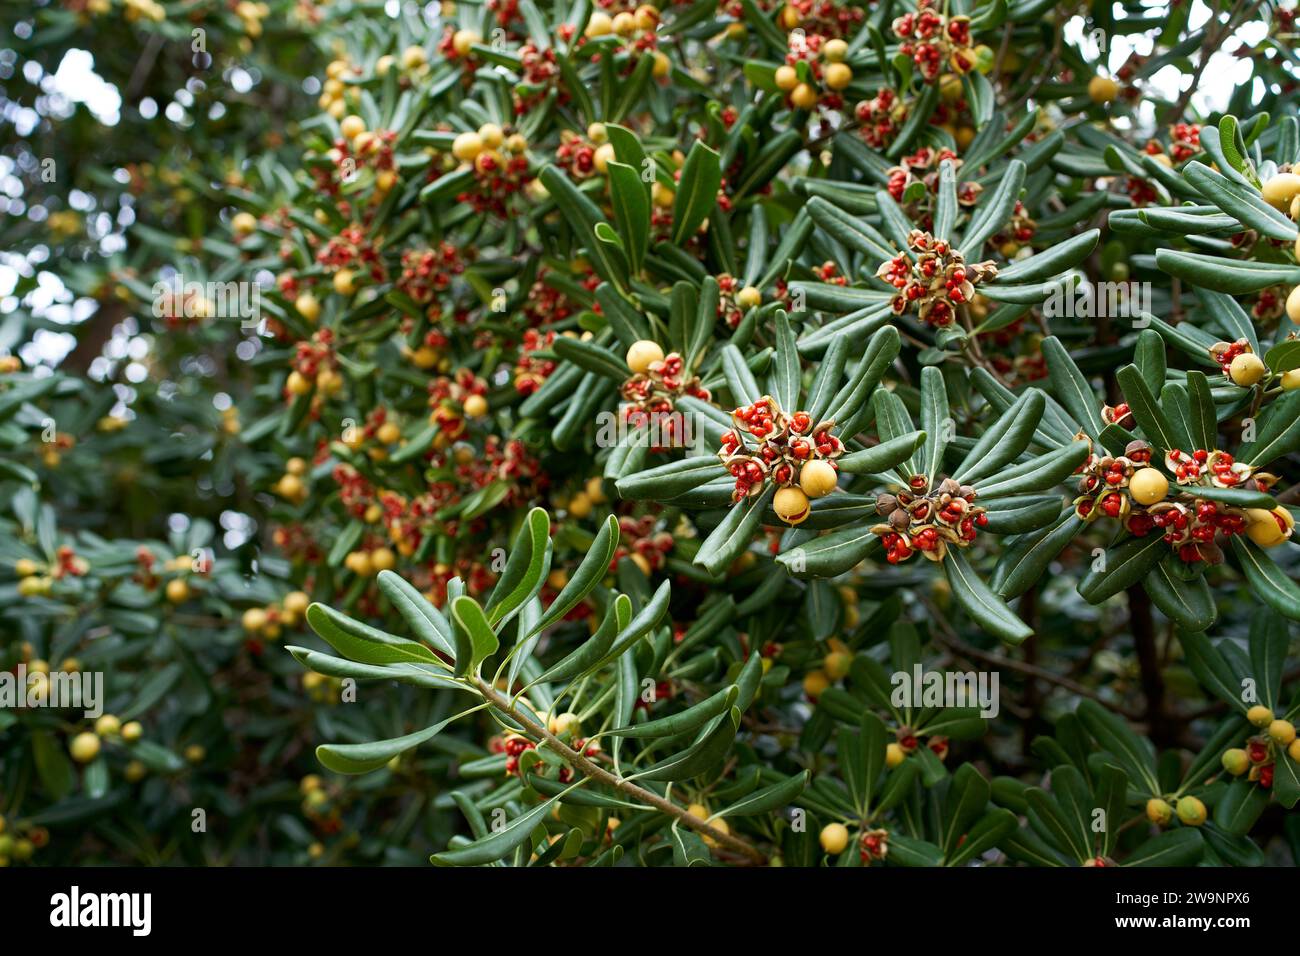 Red seeds of Australian laurel on the branches of a bush among green leaves Stock Photo